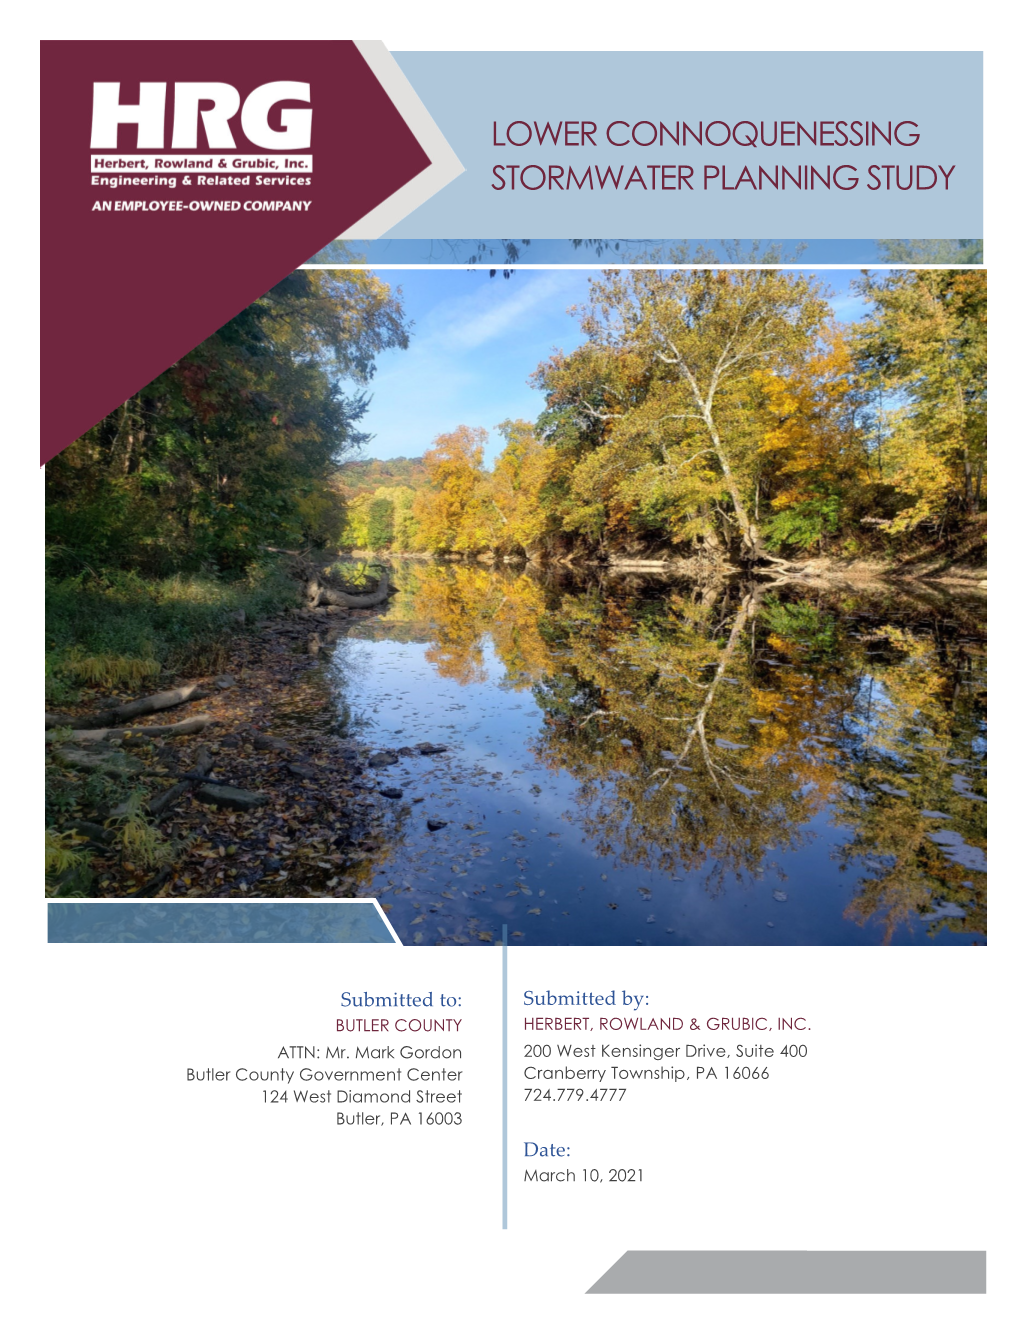 Lower Connoquenessing Stormwater Planning Study